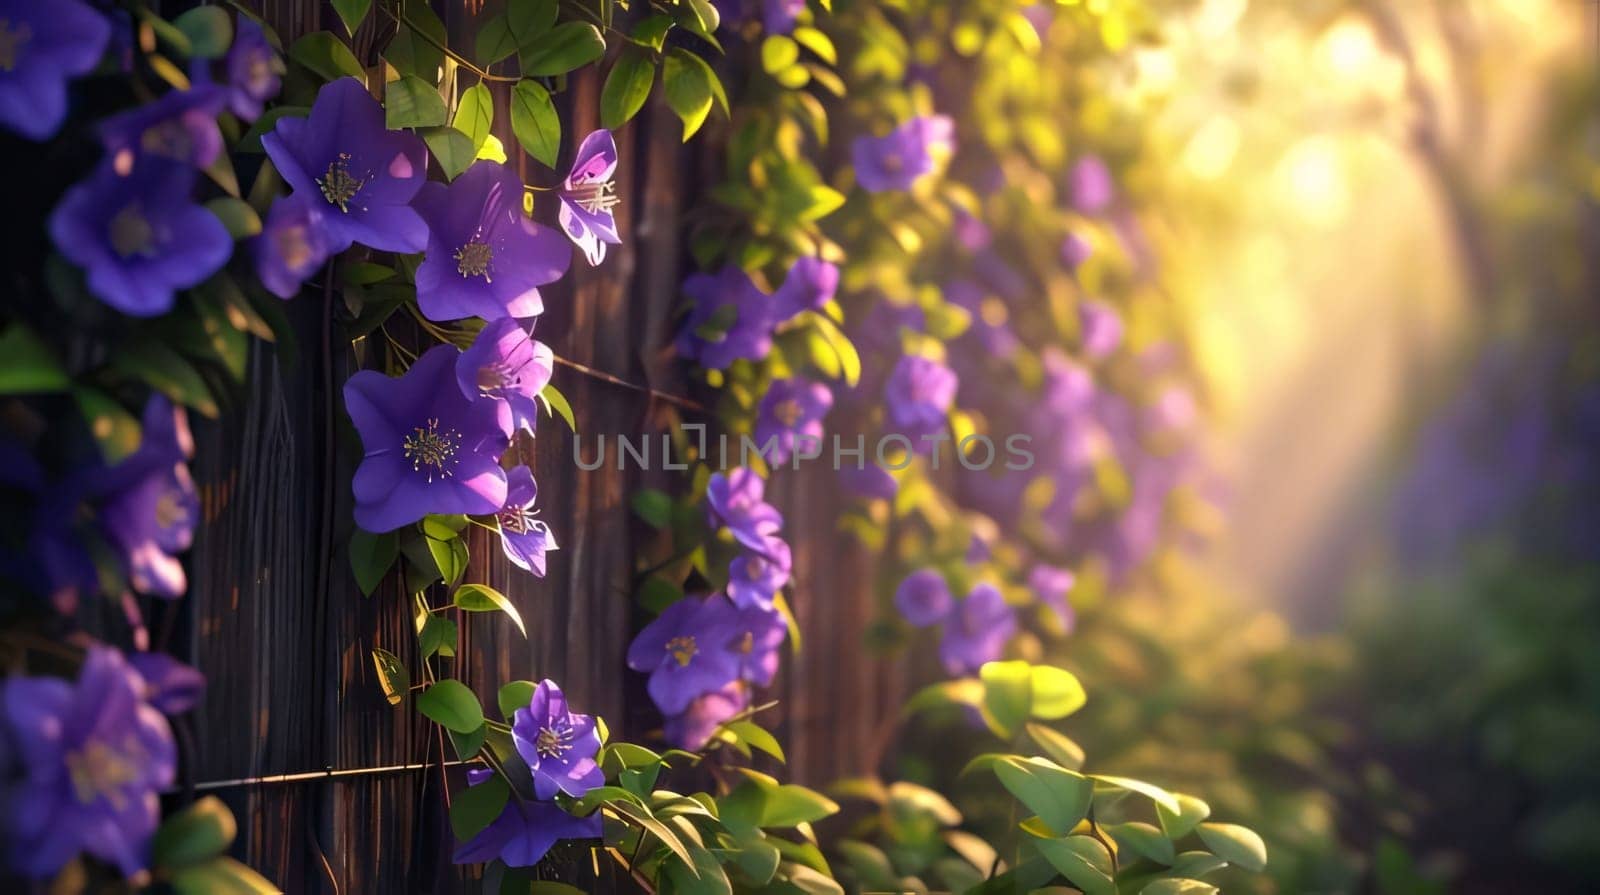 Blue flowers climbing on a wooden fence. rays of light, sunset in the background. Flowering flowers, a symbol of spring, new life. A joyful time of nature awakening to life.